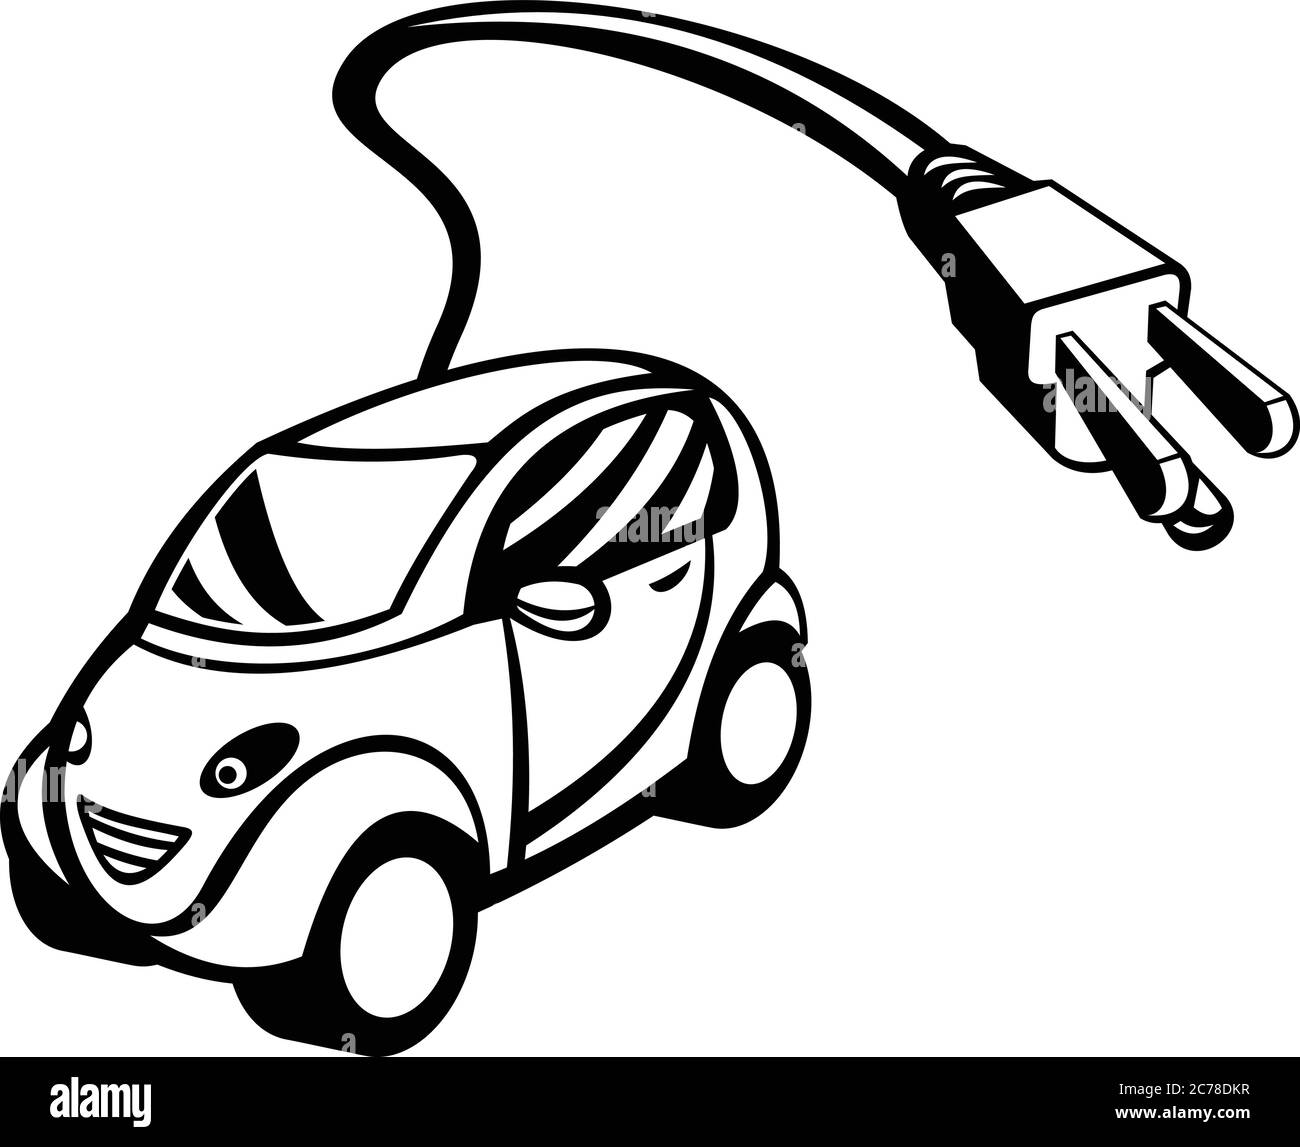 Retro black and white style illustration of an electric vehicle or green car, a passenger transport fuelled by renewable electricity to slash greenhou Stock Vector